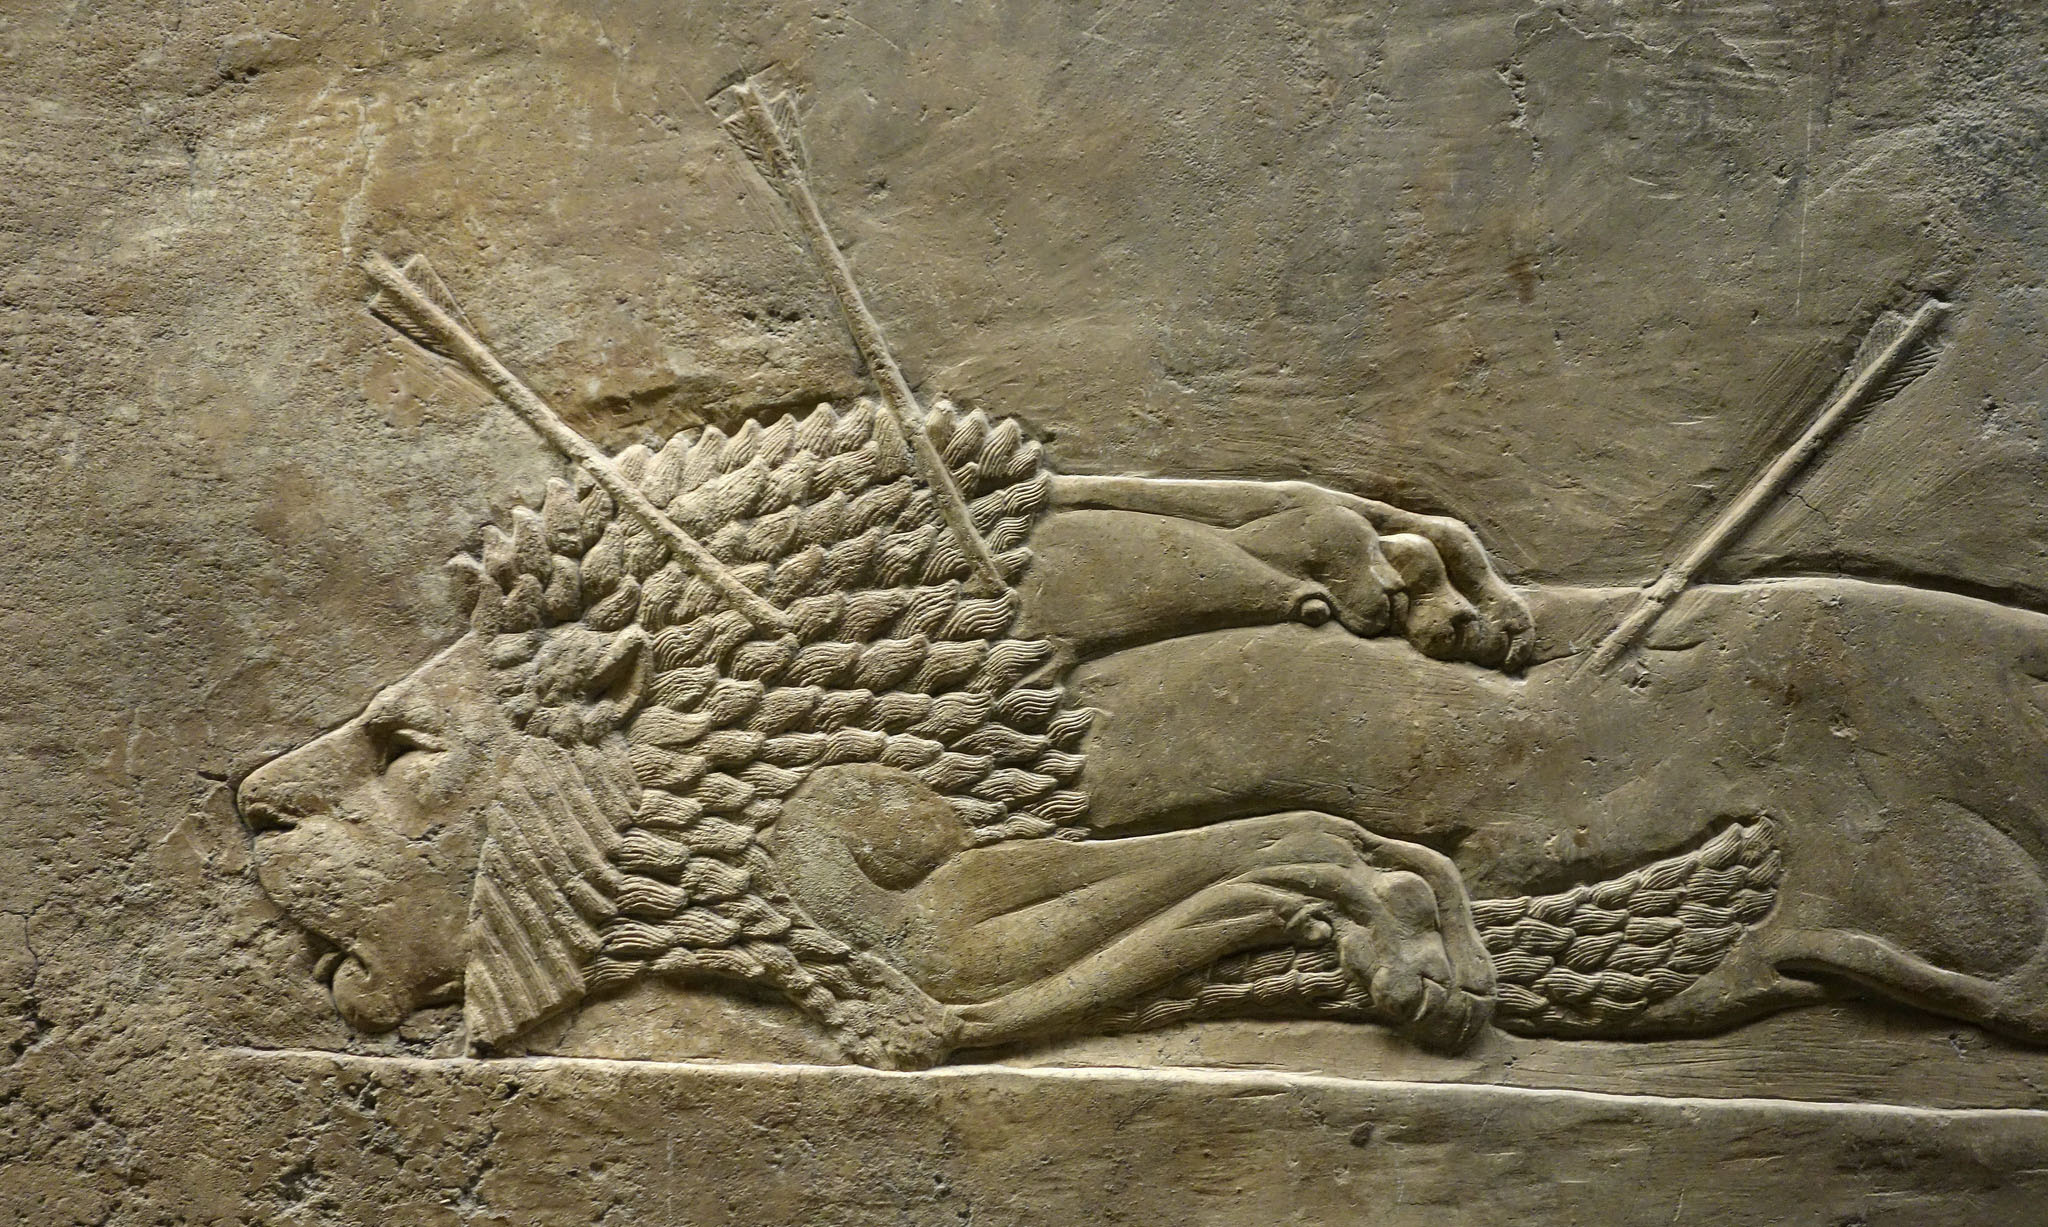 Lion pierced with arrows (detail), Lion Hunts of Ashurbanipal (ruled 669–630 B.C.E.), c. 645 B.C.E., gypsum,Neo-Assyrian, hall reliefs from Palace at Ninevah across the Tigris from present day Mosul, Iraq (British Museum) (photo: Steven Zucker, CC BY-NC-SA 2.0)